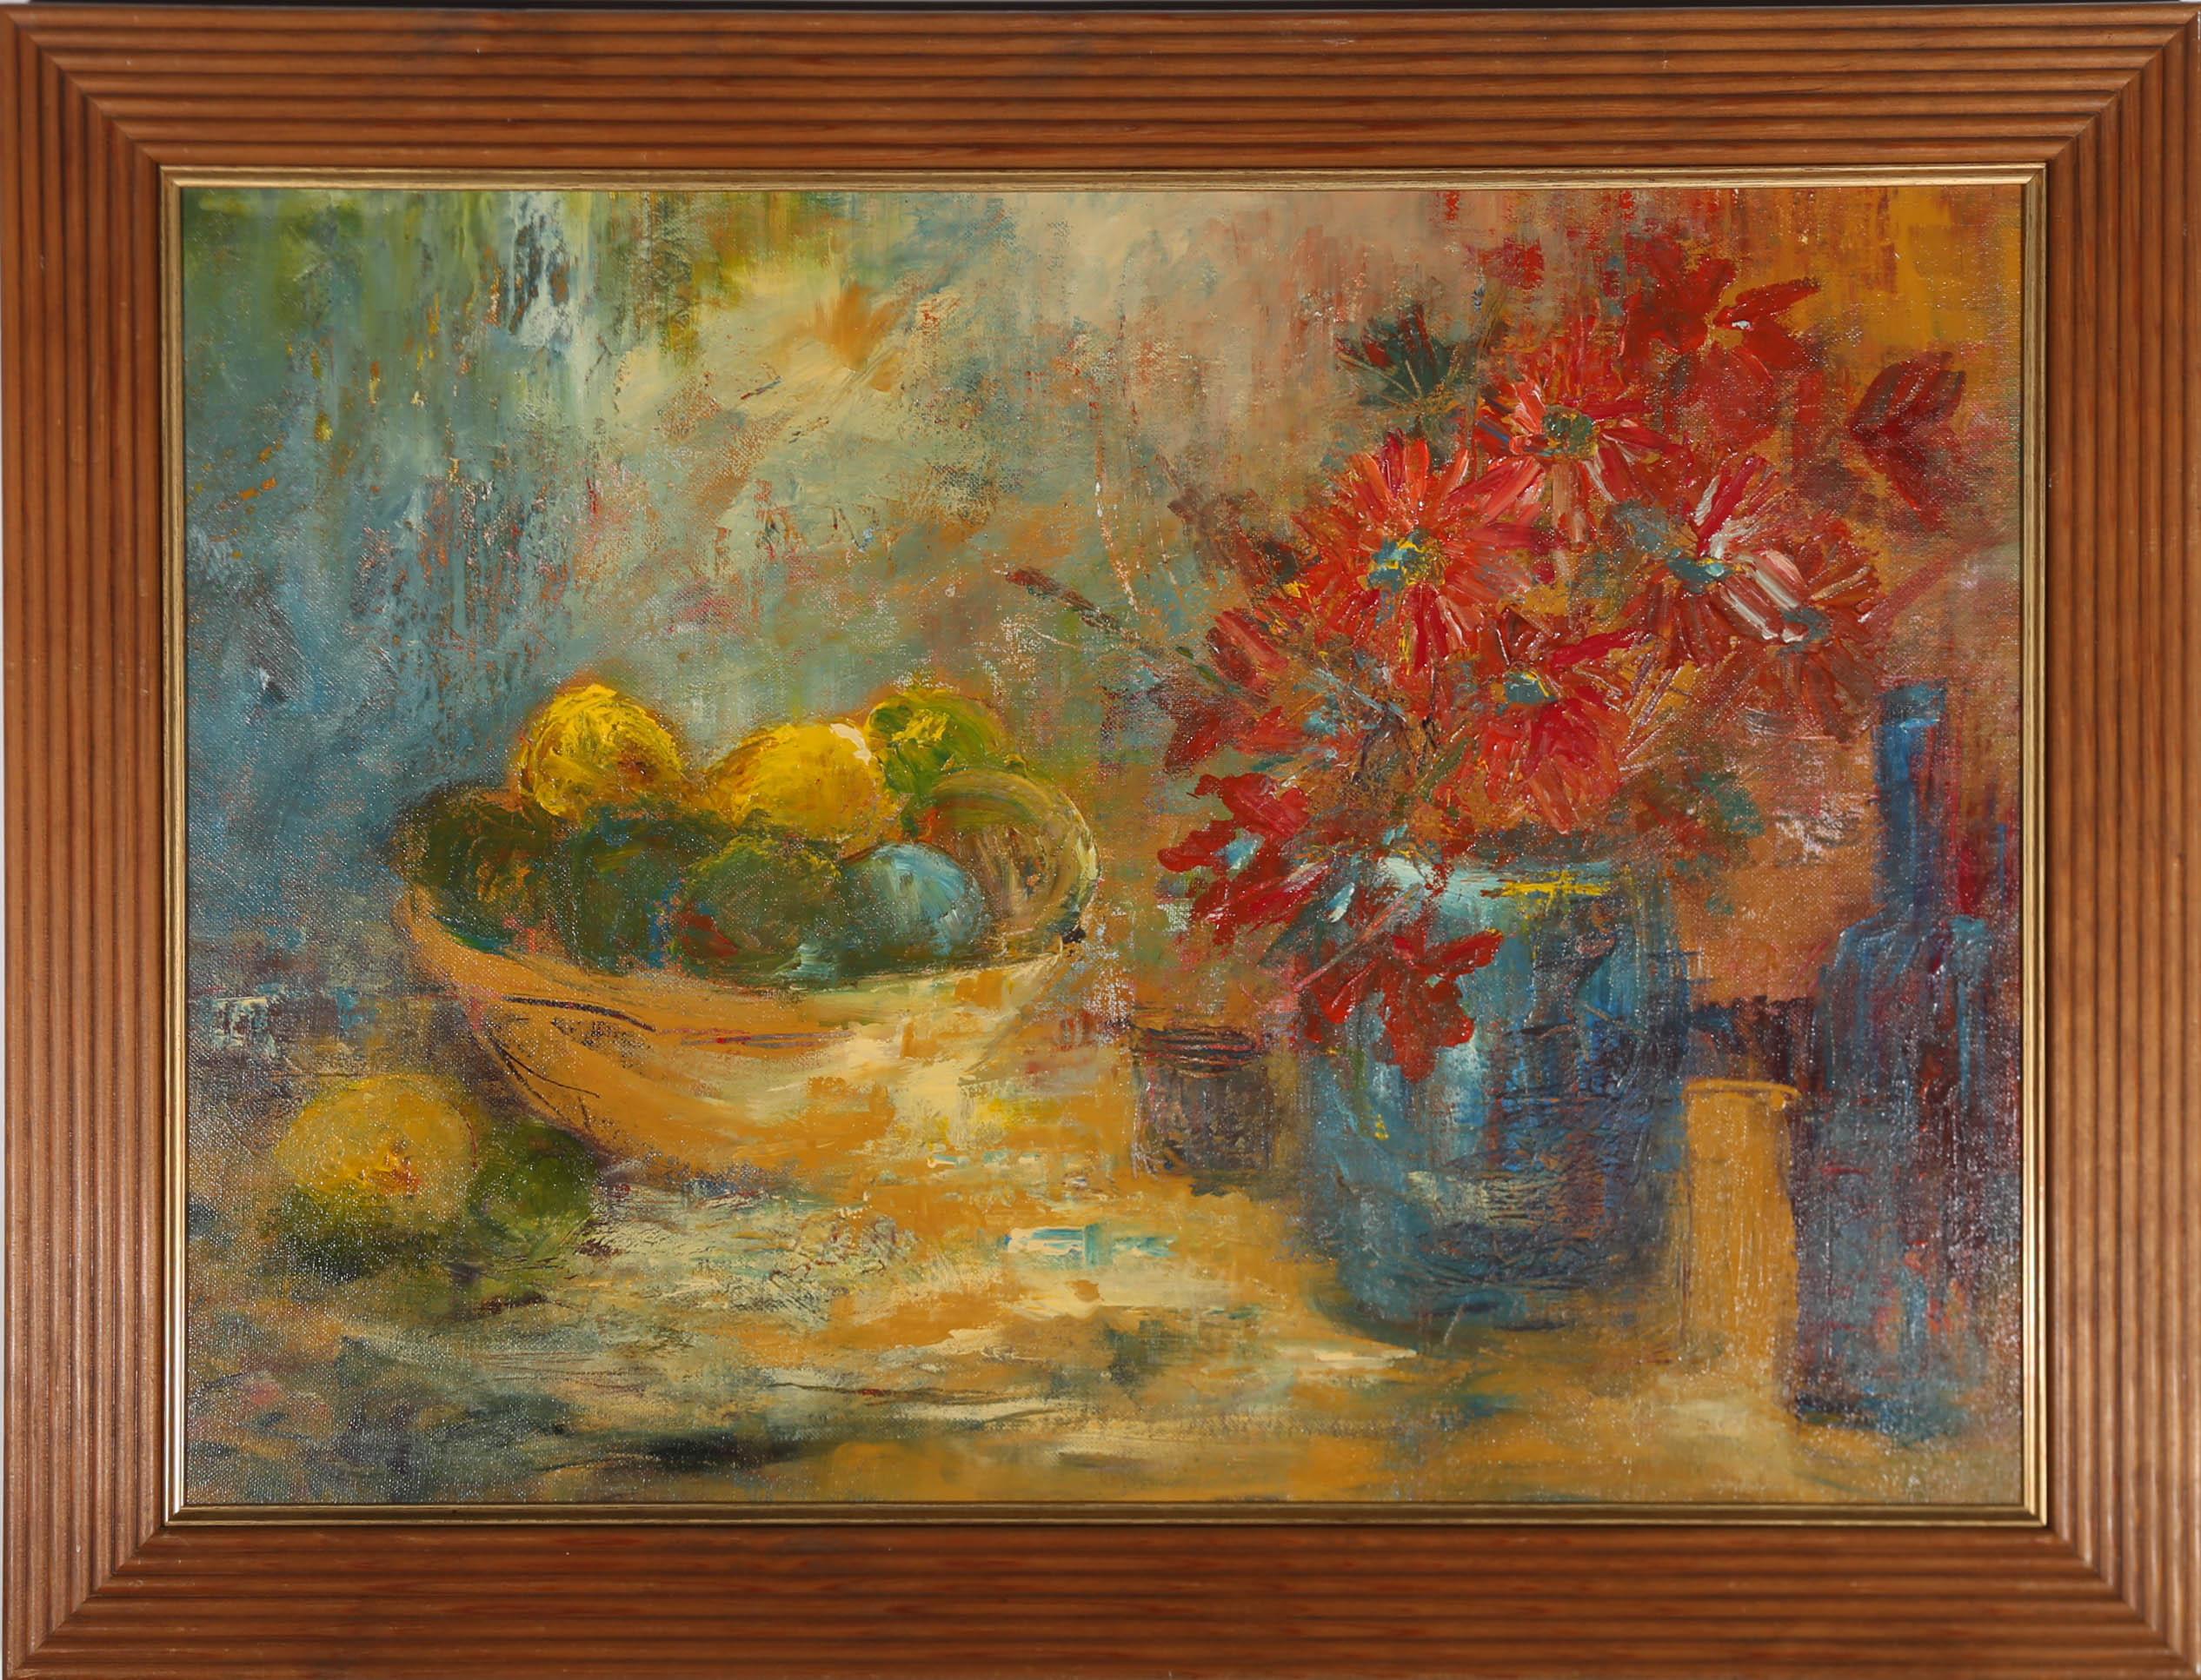 Framed 20th Century Oil - Still Life, Citrus Fruits & Flowers - Painting by Unknown